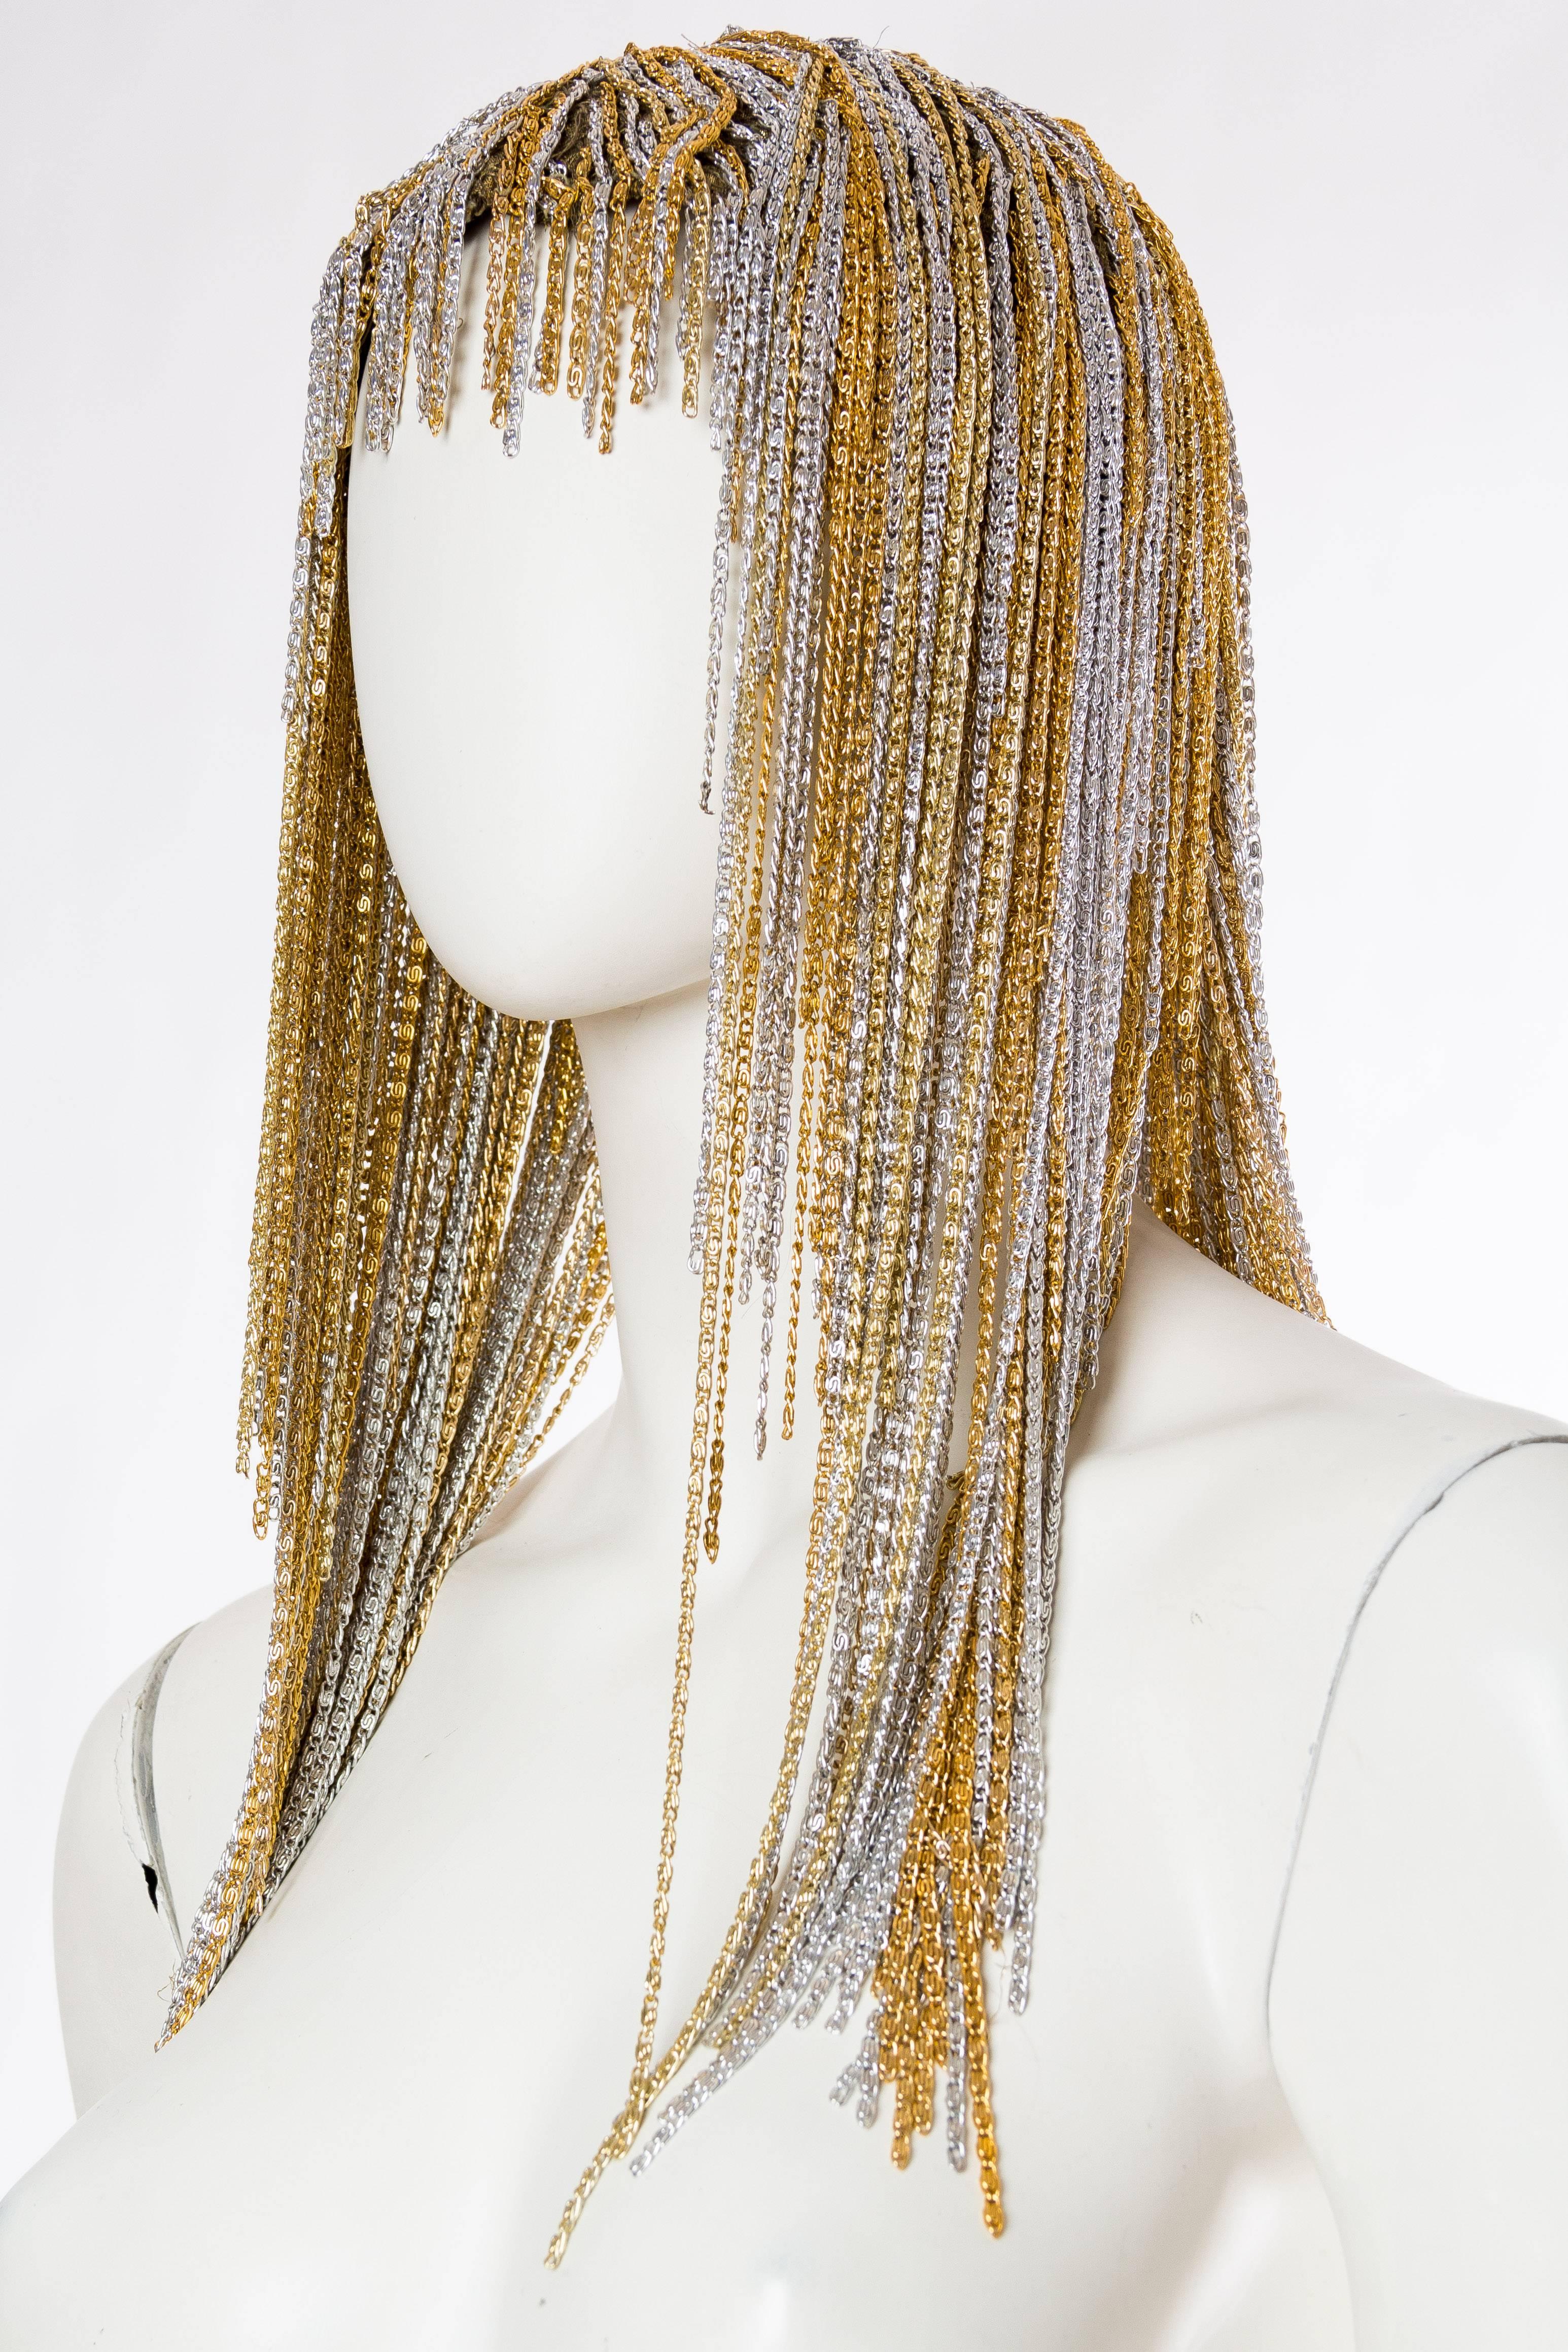 Made from antique metal lamé from the 1920s, however the chain is the same we have on several of our Azzaro pieces from the 1970s. This piece is tricky to date. Age aside there is no question as to how sensual and gorgeous this chain wig is. The